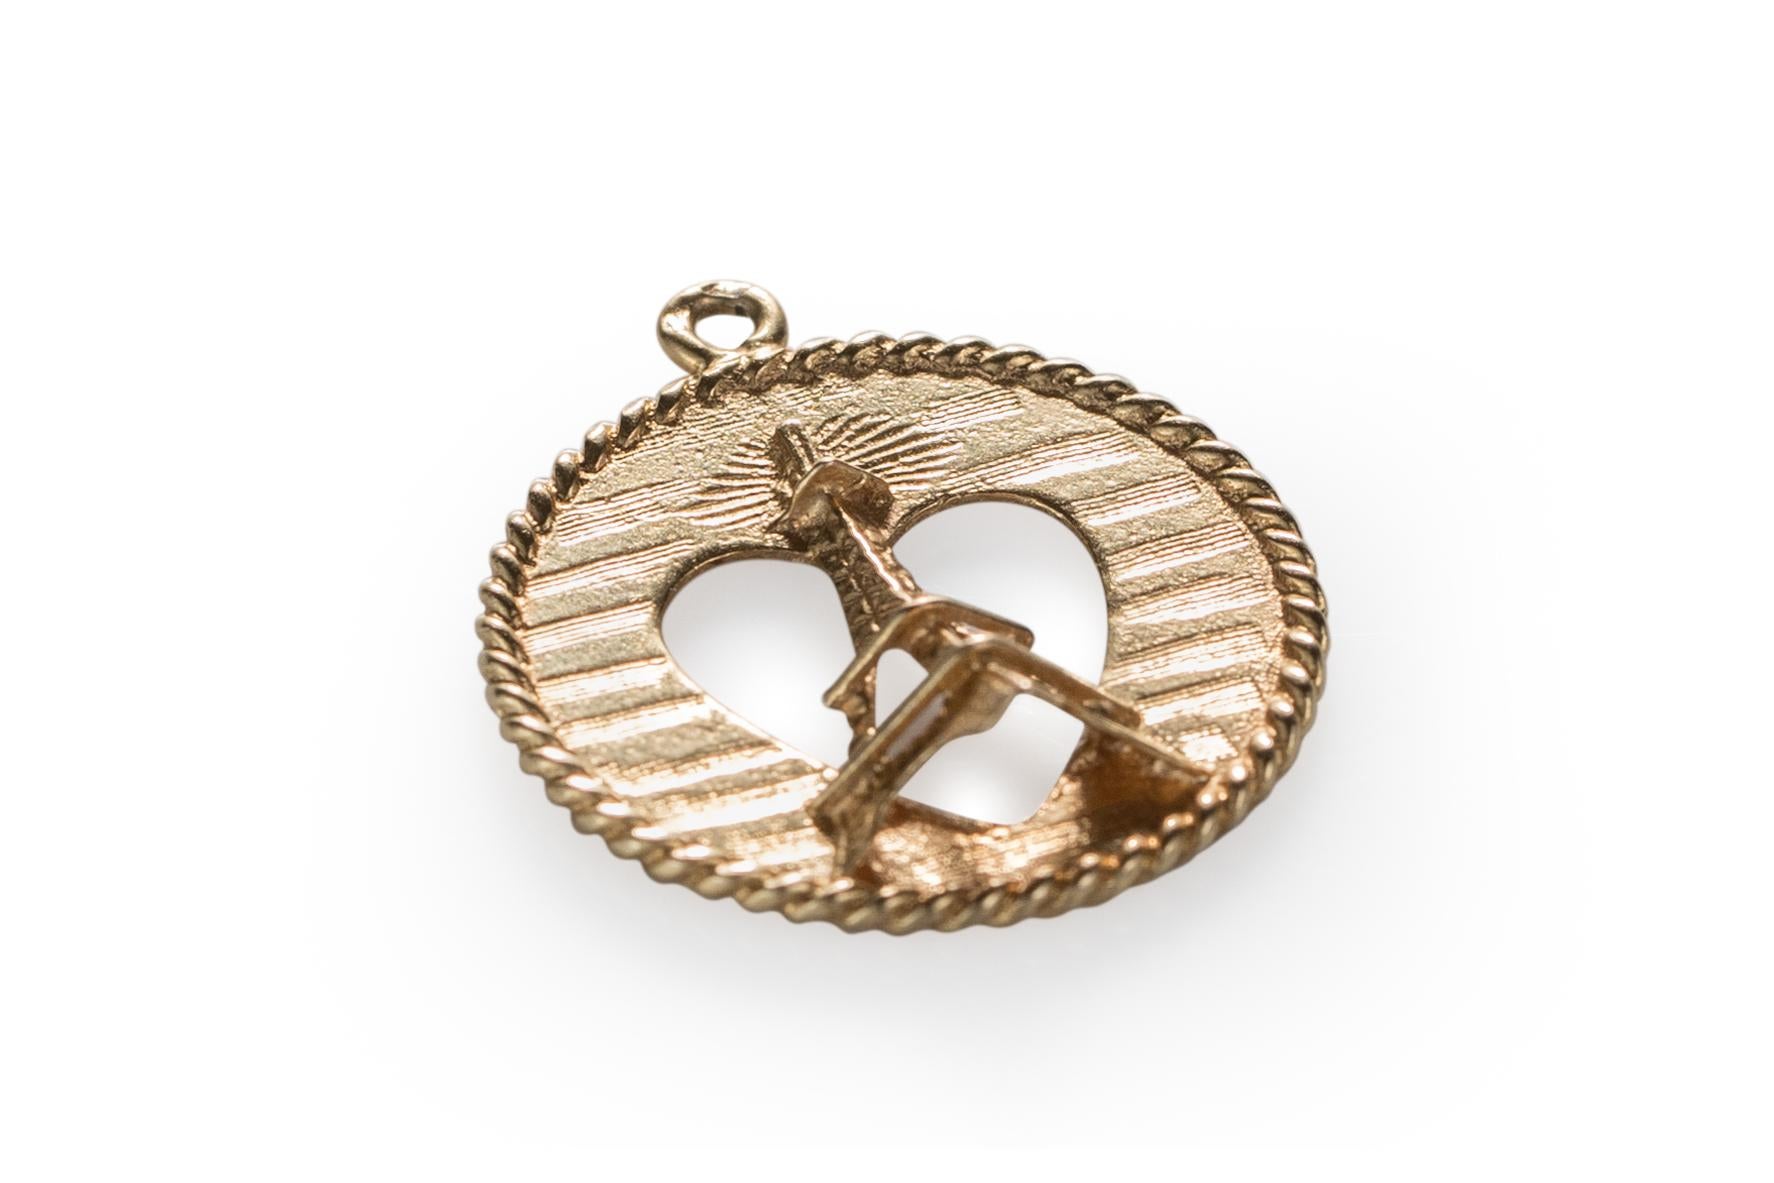 Adorable 14 karat yellow gold charm featuring ever so charming Eiffel Tower in a heart shape cut out on a solid gold panel background. 

The eiffel tower is a 3-d piece protruding out of the charm. There is a heart shape cut out directly behind it.